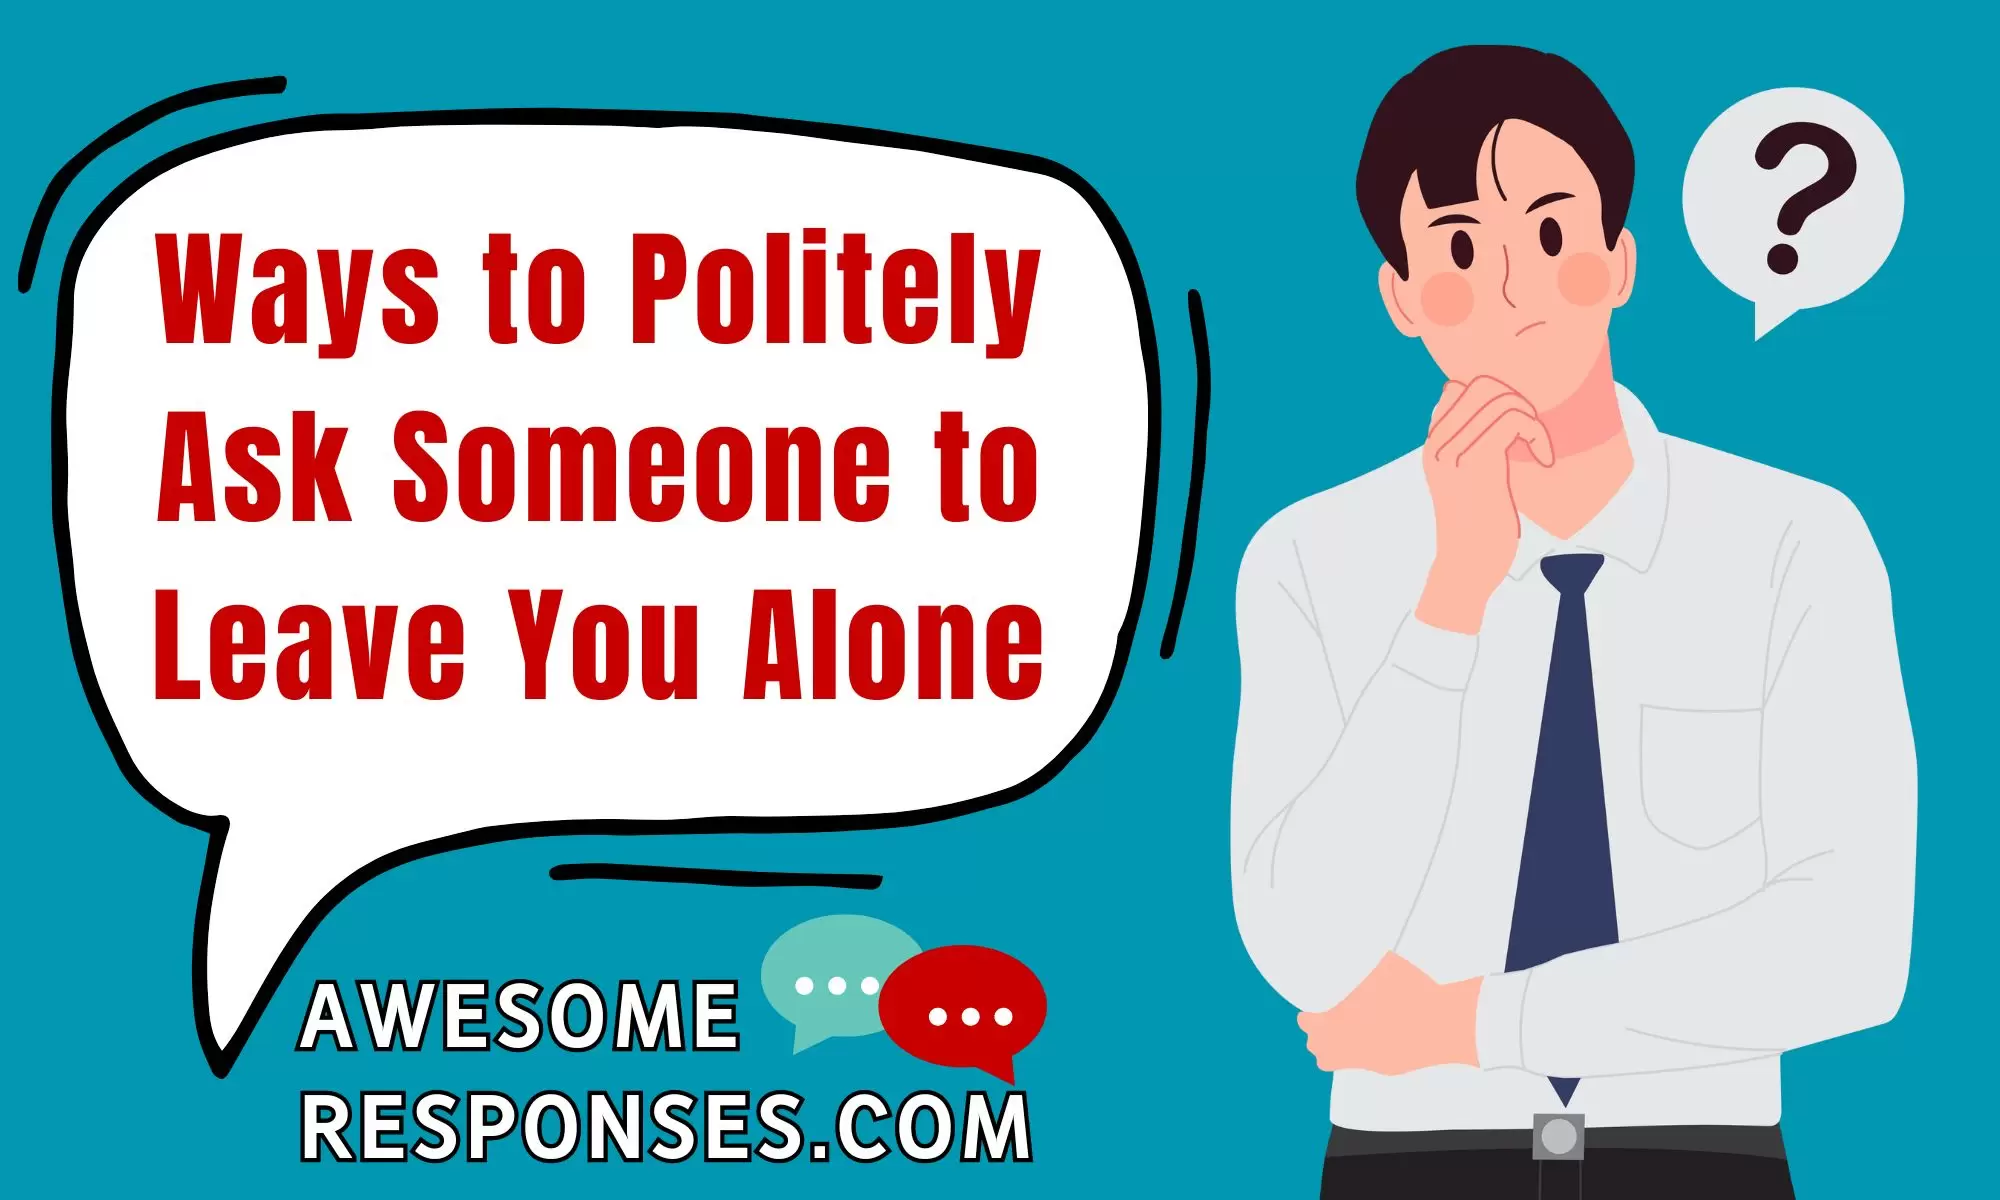 Ways to Politely Ask Someone to Leave You Alone